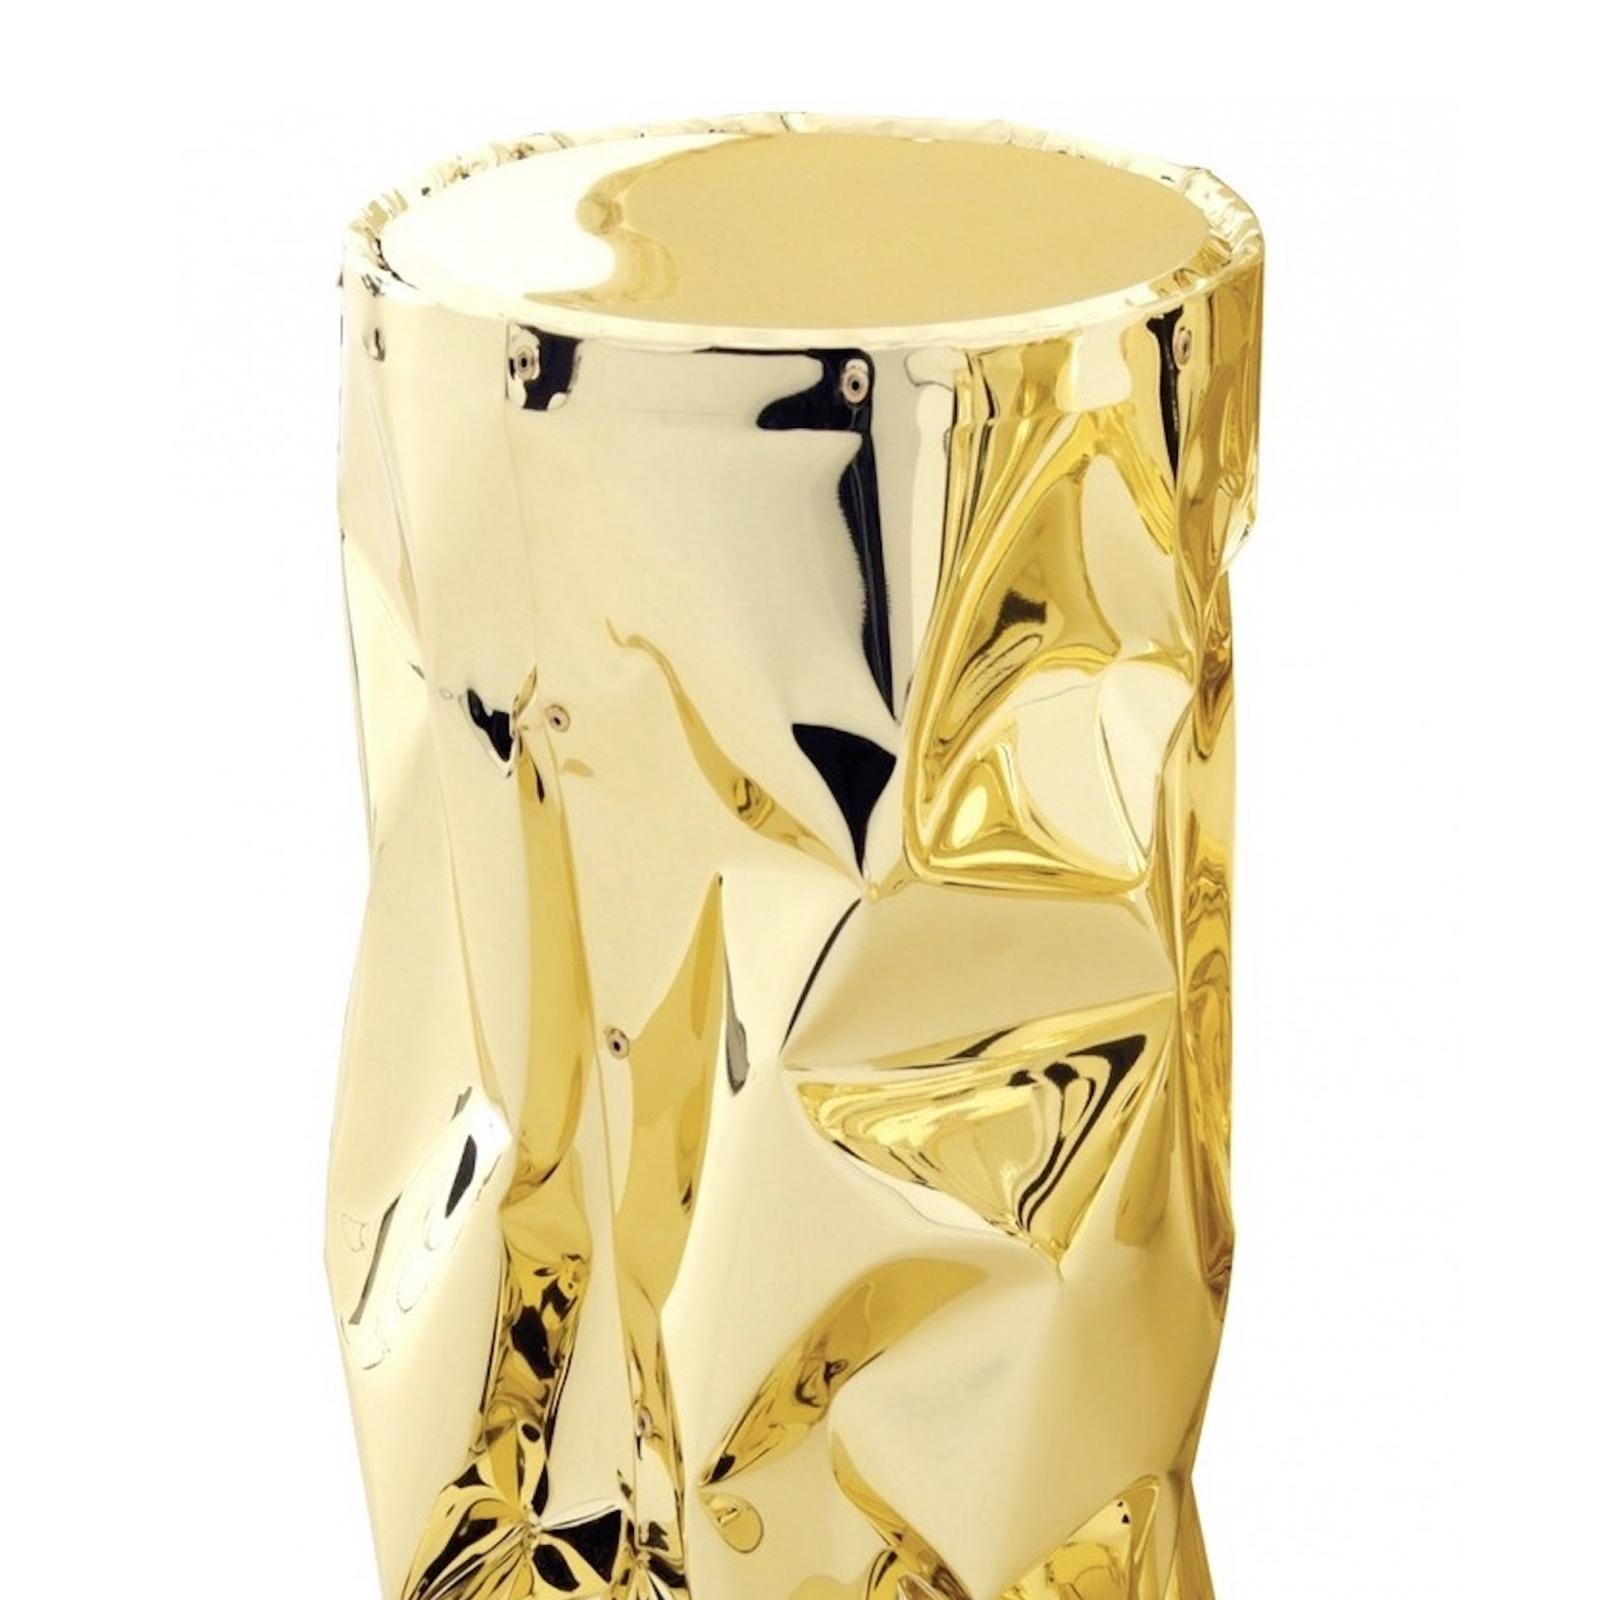 Stool bumpy large with structure in strained
polished aluminium in gold finish. Top in antique
gold mirror.
Also available in chrome finish.